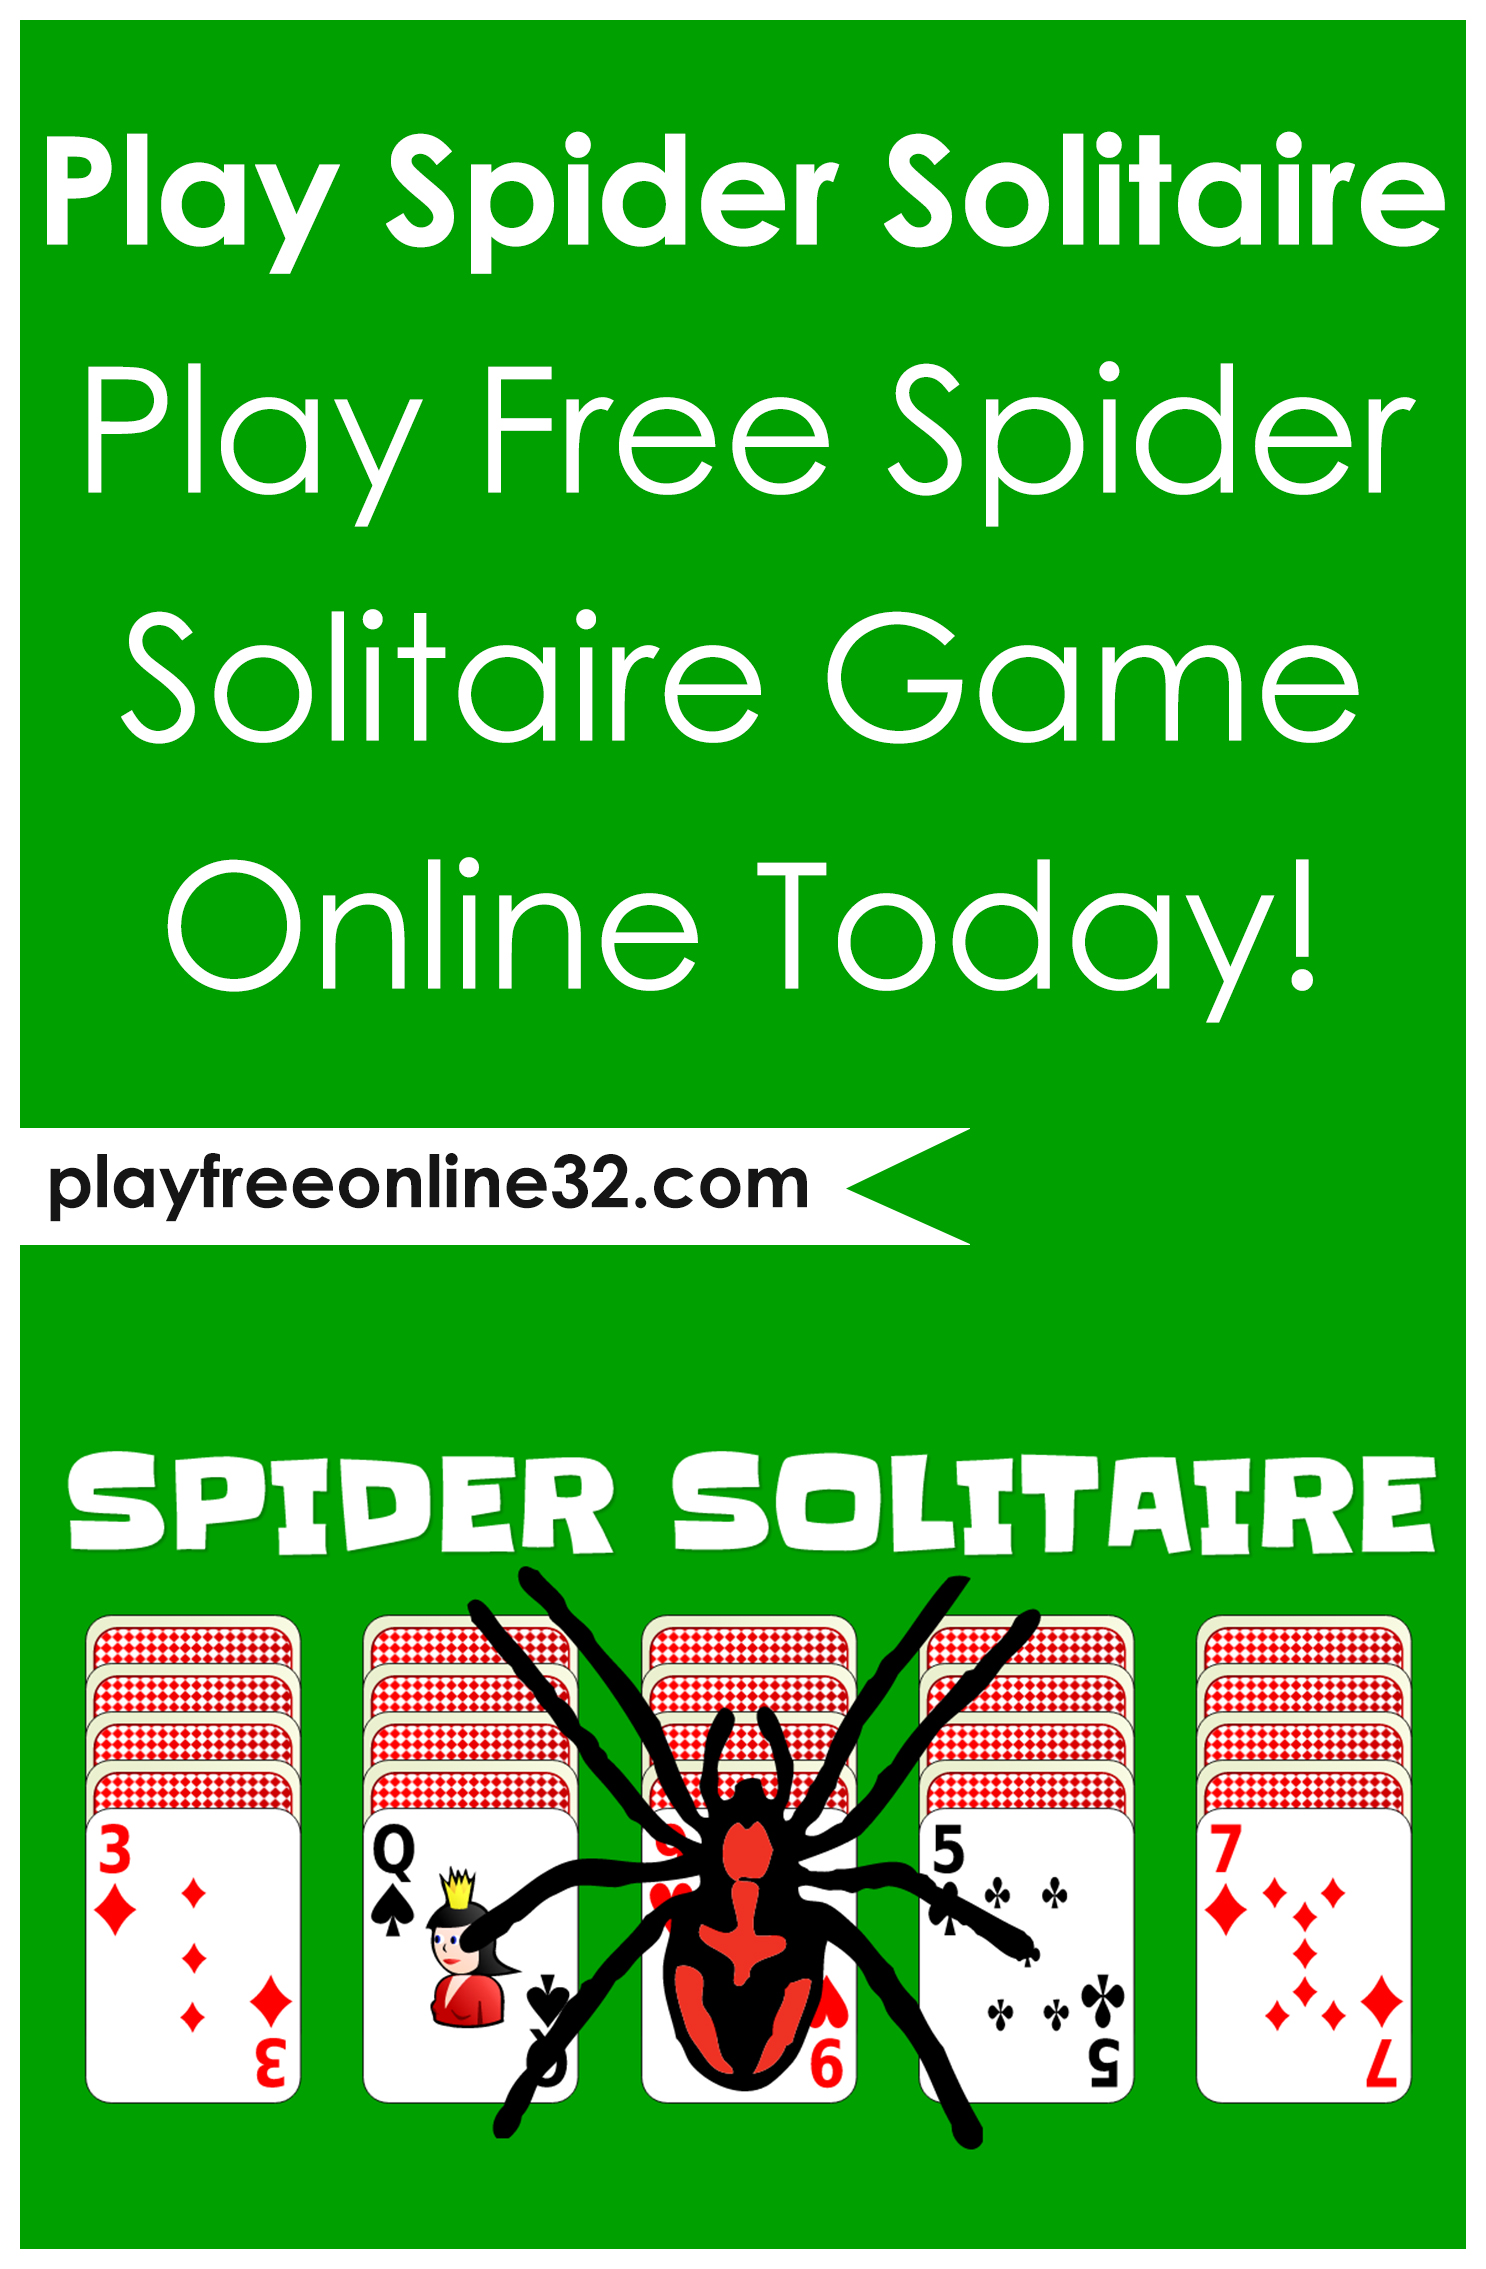 Play Spider Solitaire • Play Free Spider Solitaire Game Online Today!